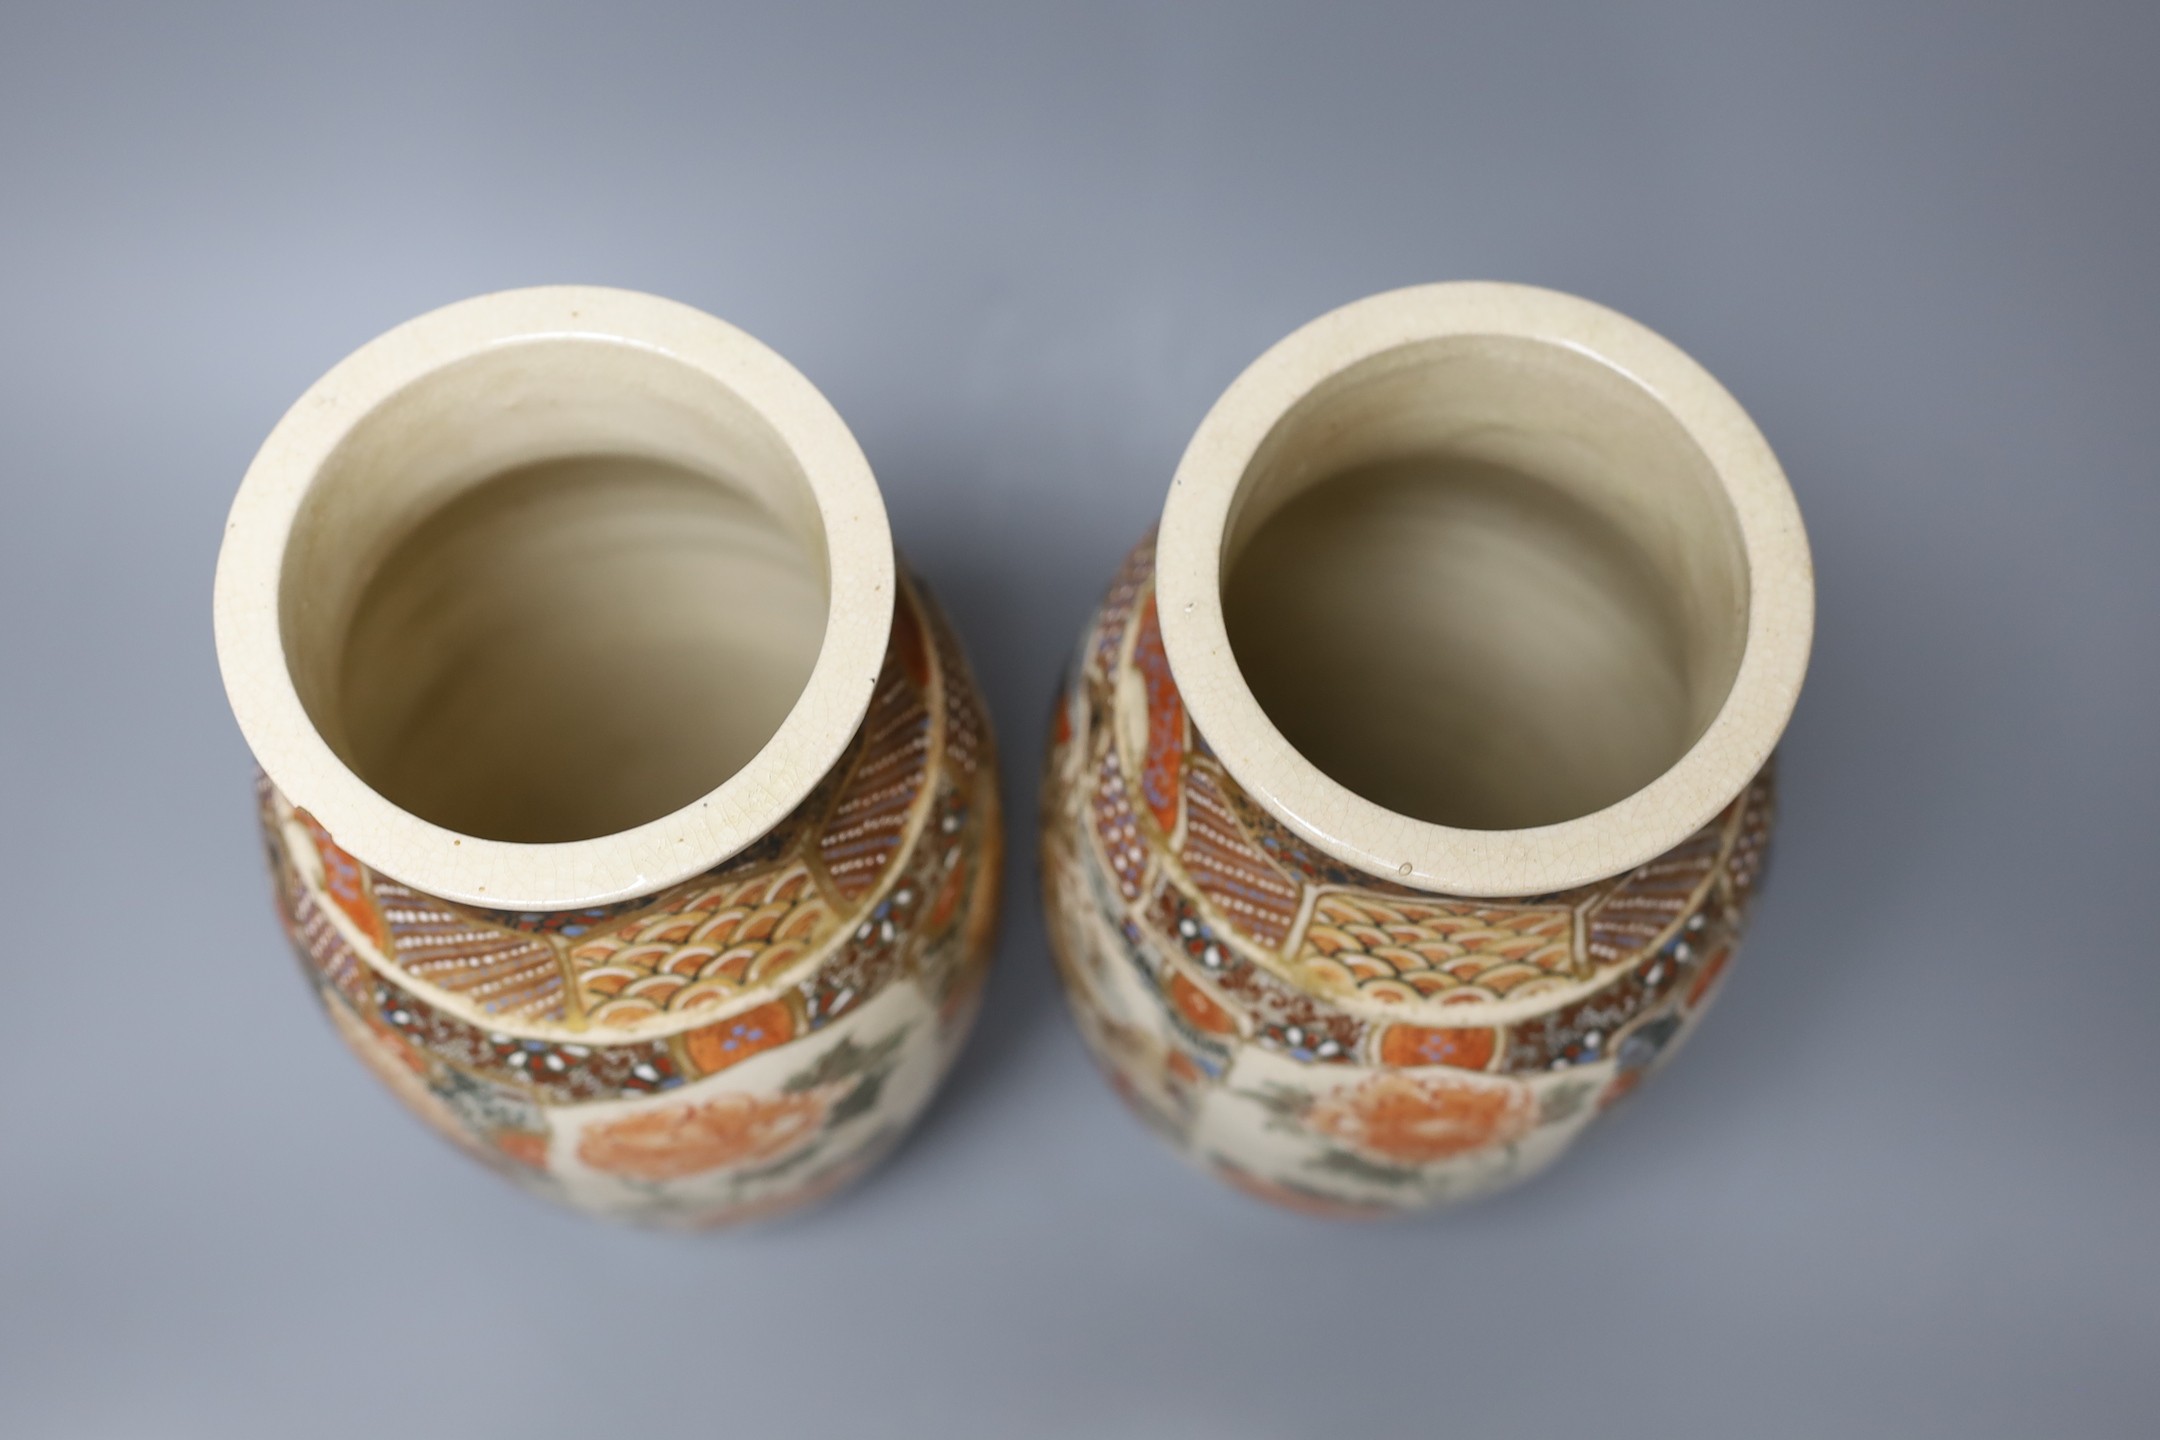 A pair of Satsuma pottery vases, c.1900, 25cm tall